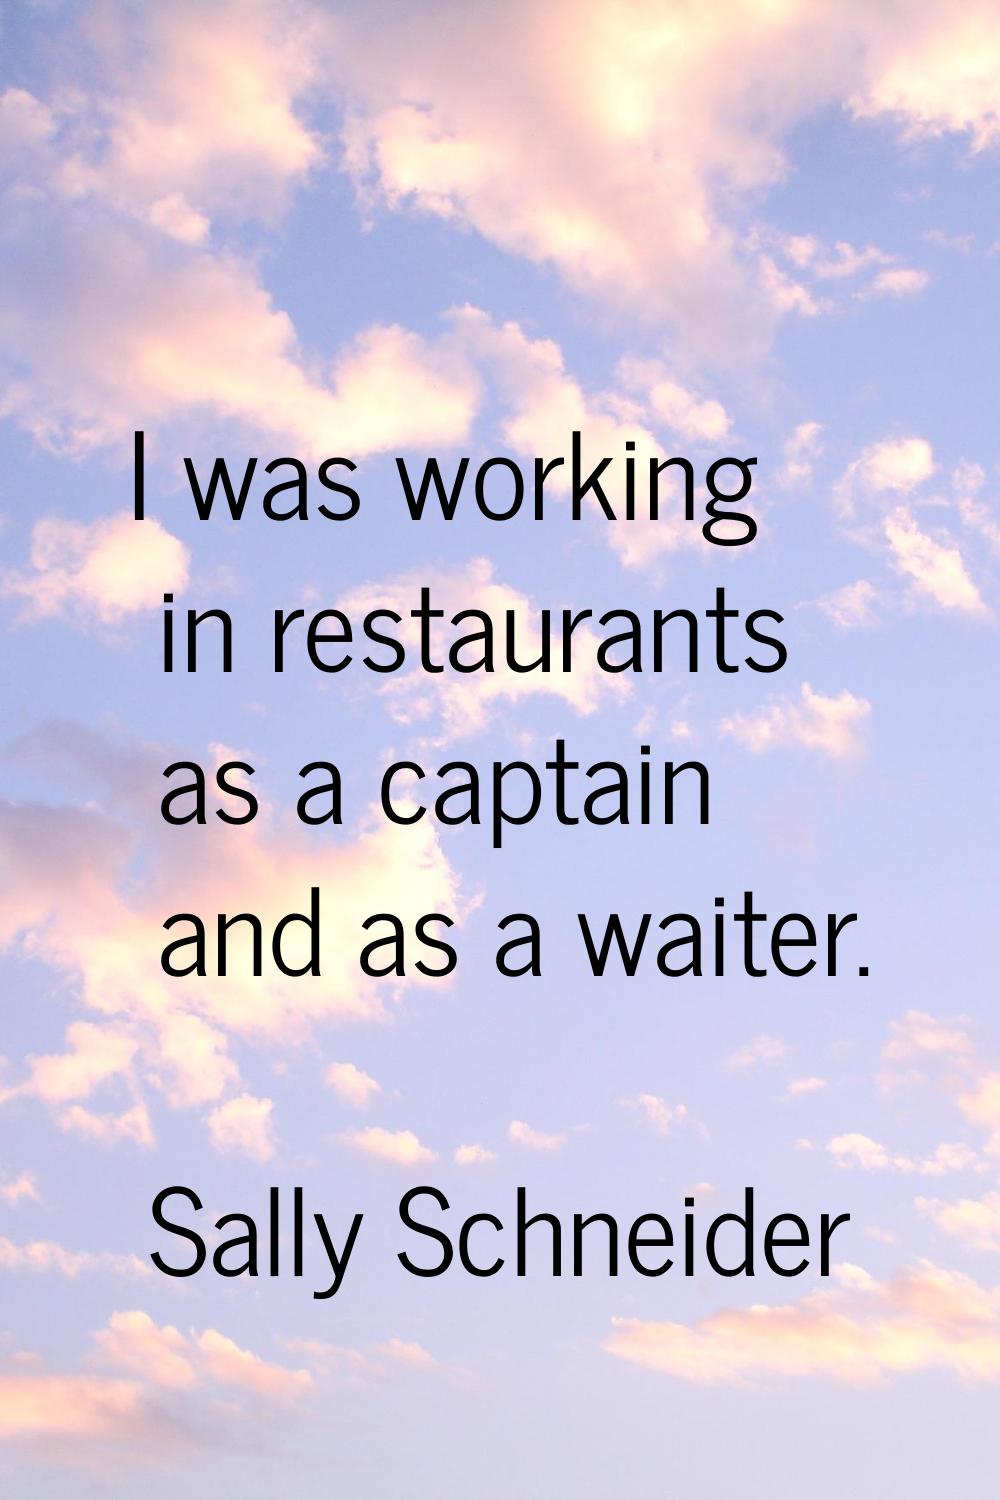 I was working in restaurants as a captain and as a waiter.